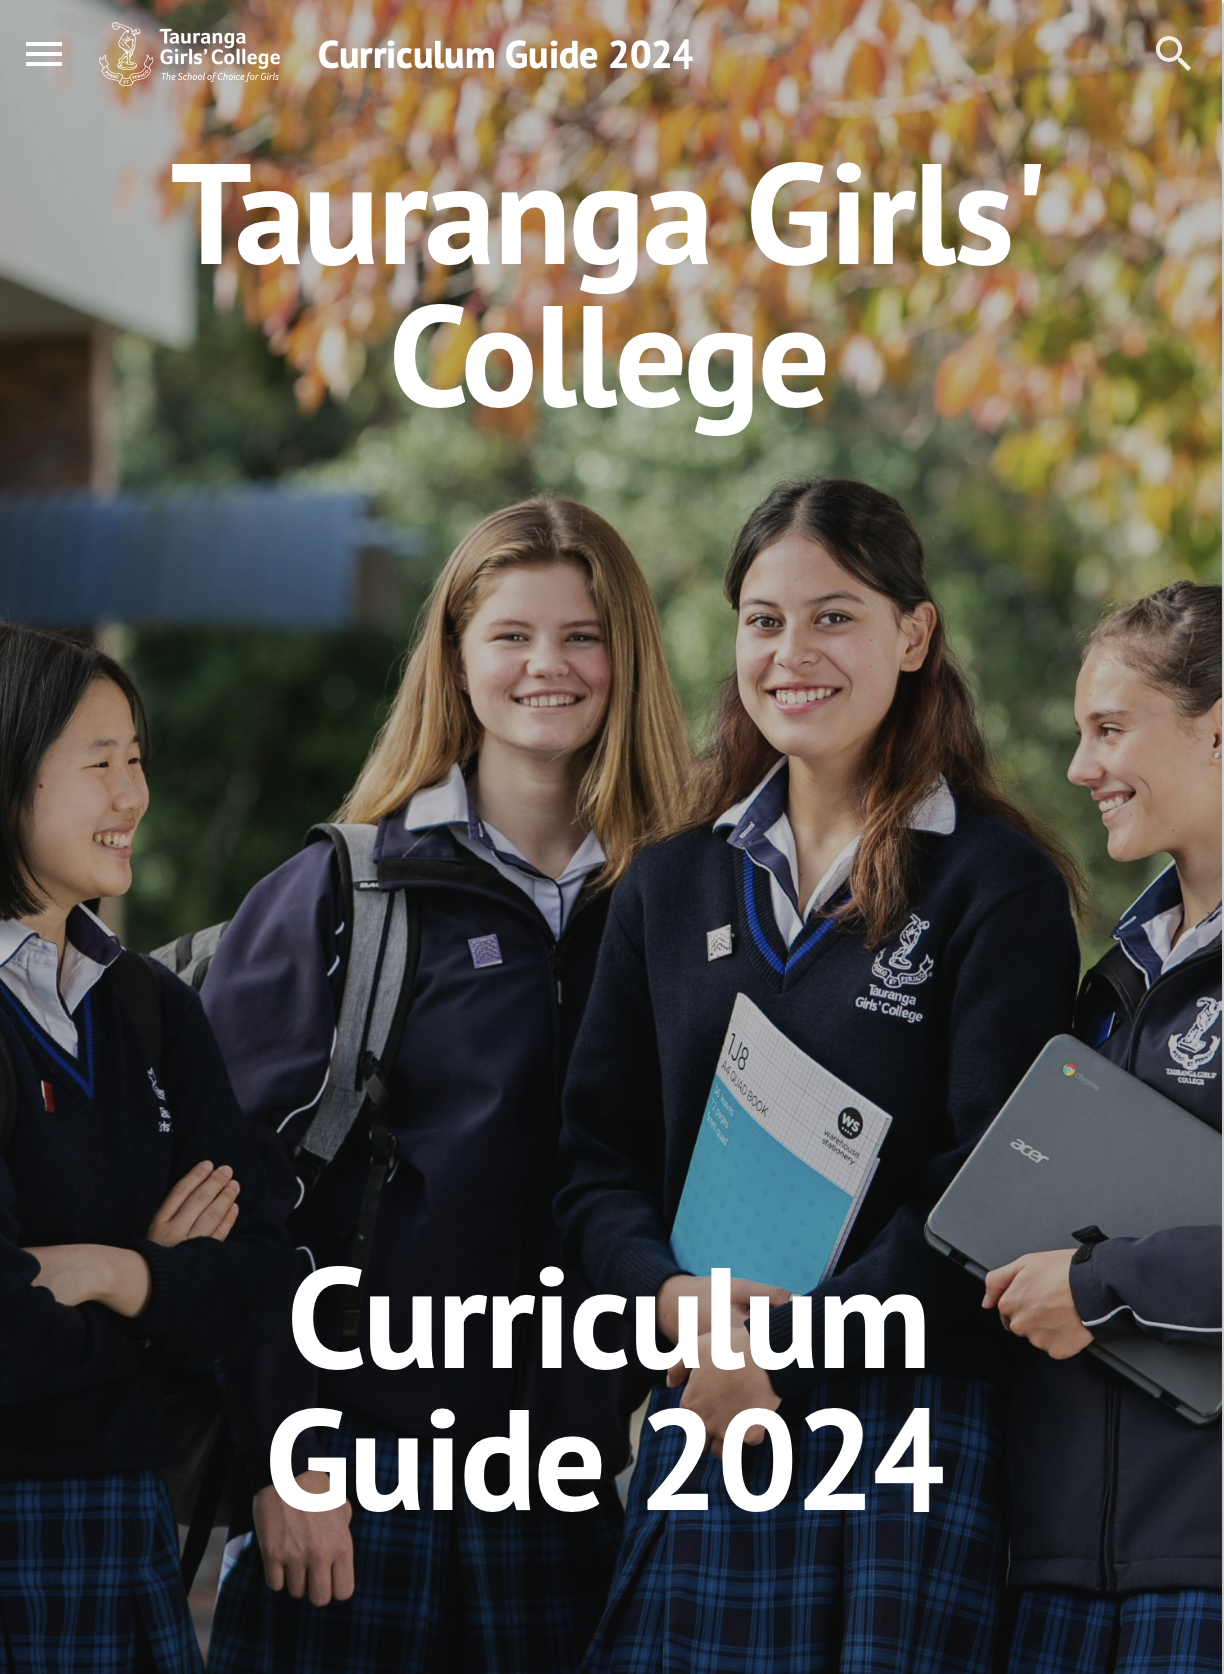 Curriculum guide 2024 cover.png